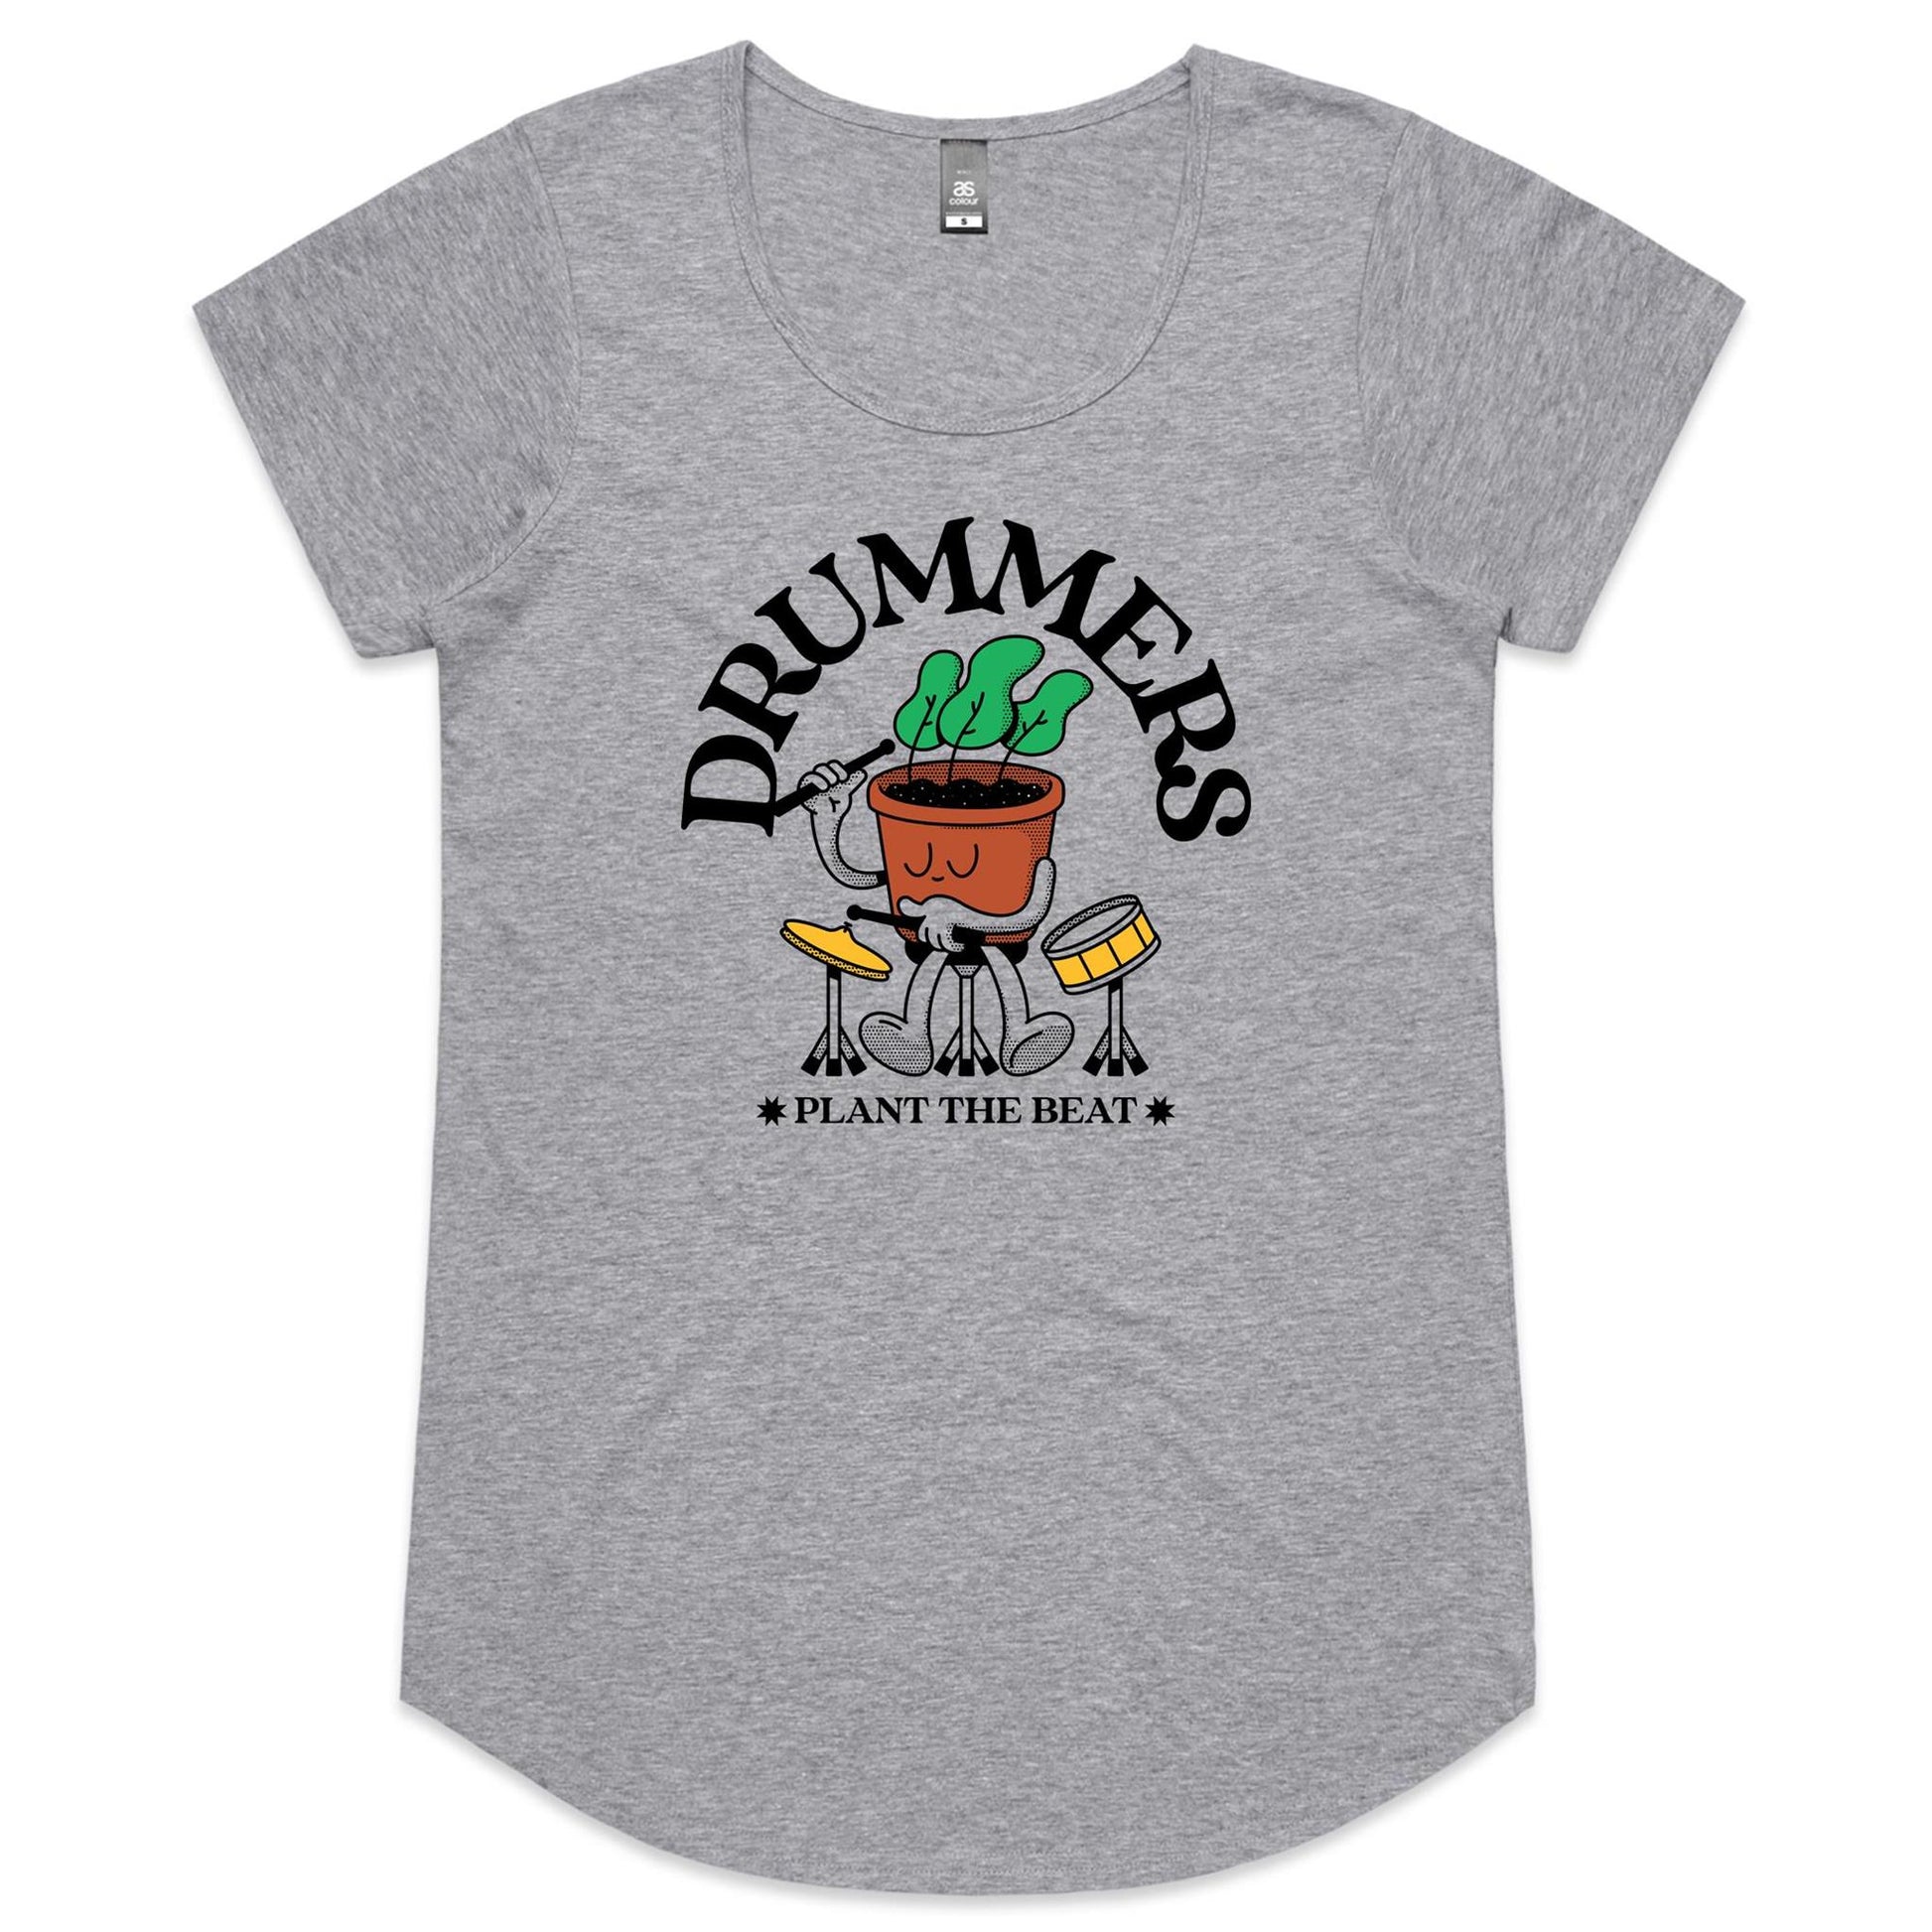 Drummers - Womens Scoop Neck T-Shirt Grey Marle Womens Scoop Neck T-shirt Music Plants